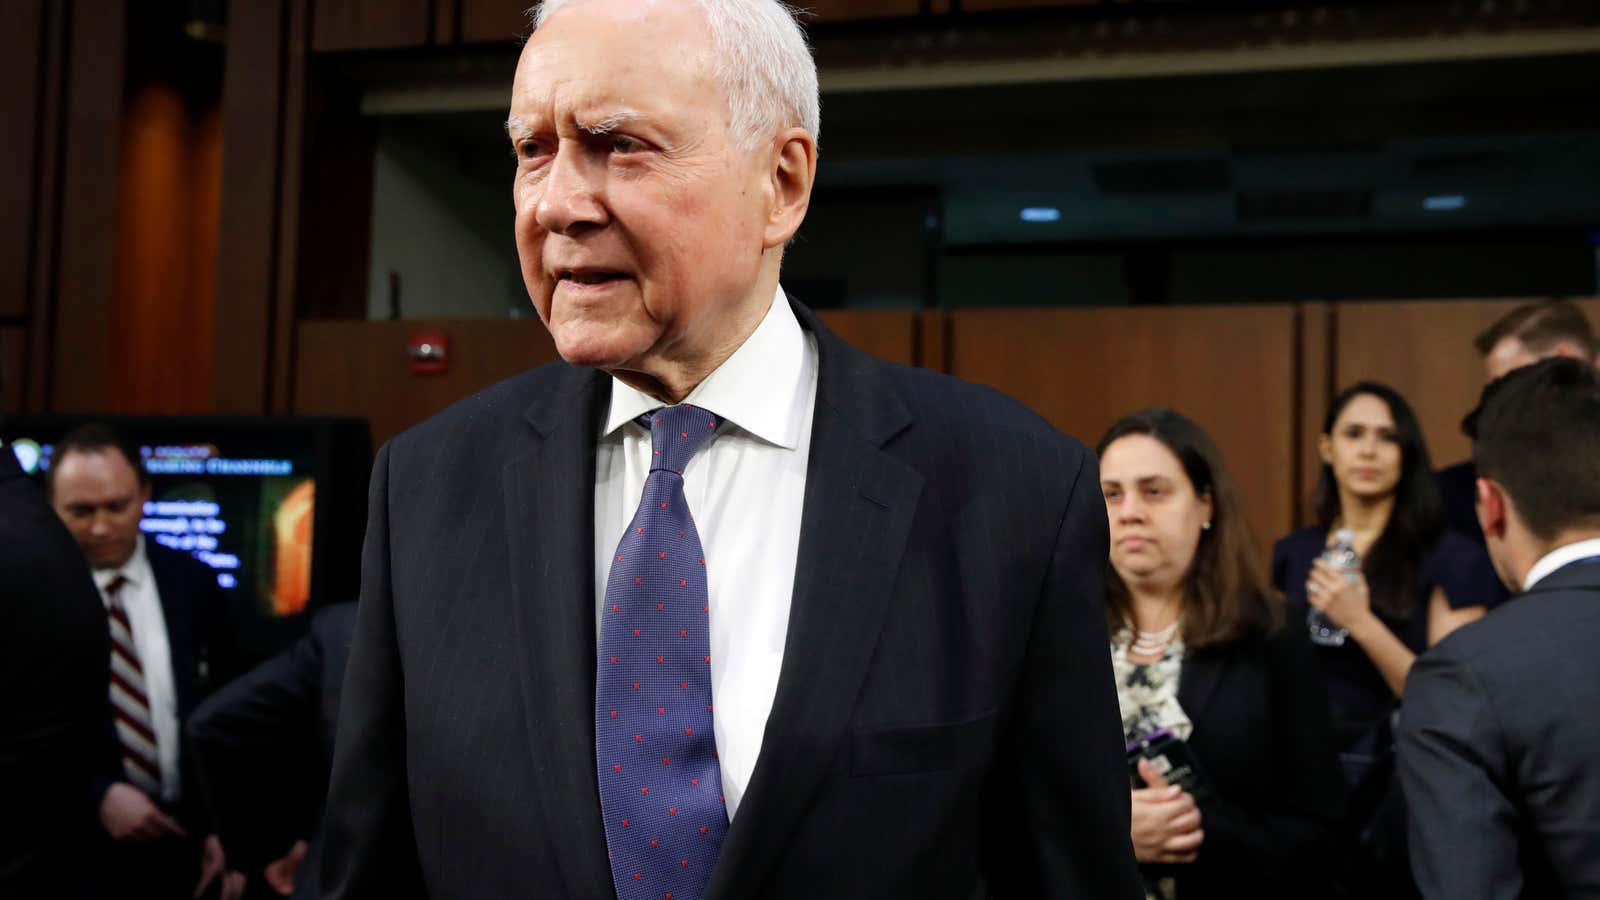 Hatch backed Kavanaugh over a sexual assault allegation.